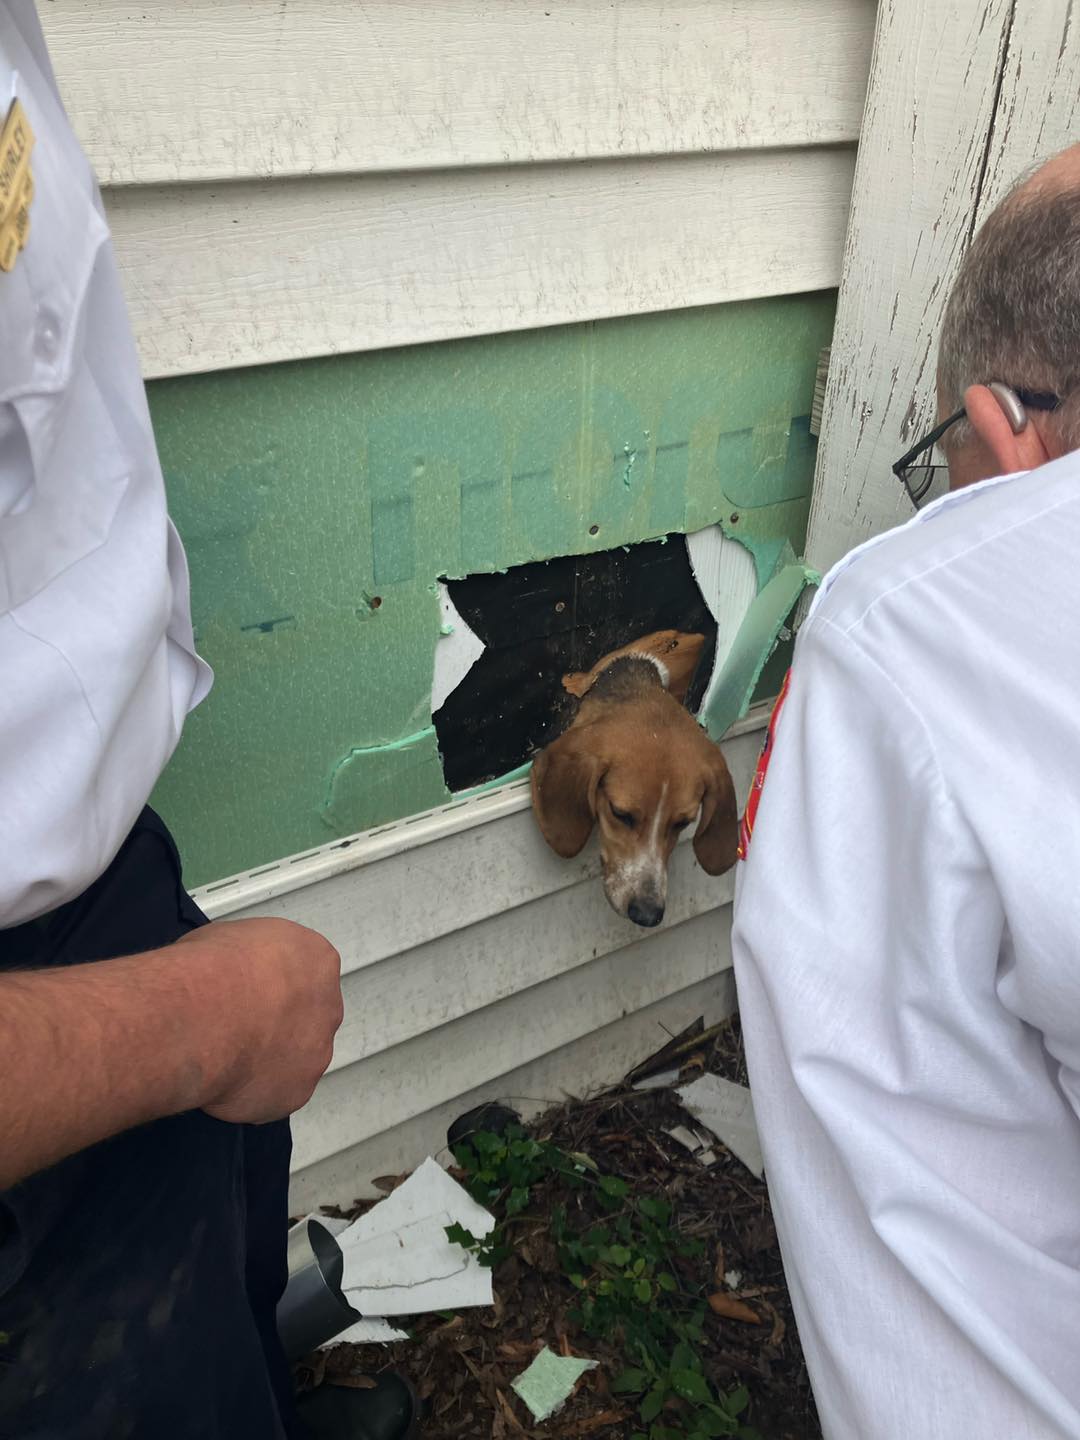 photo of a dog stuck in vent